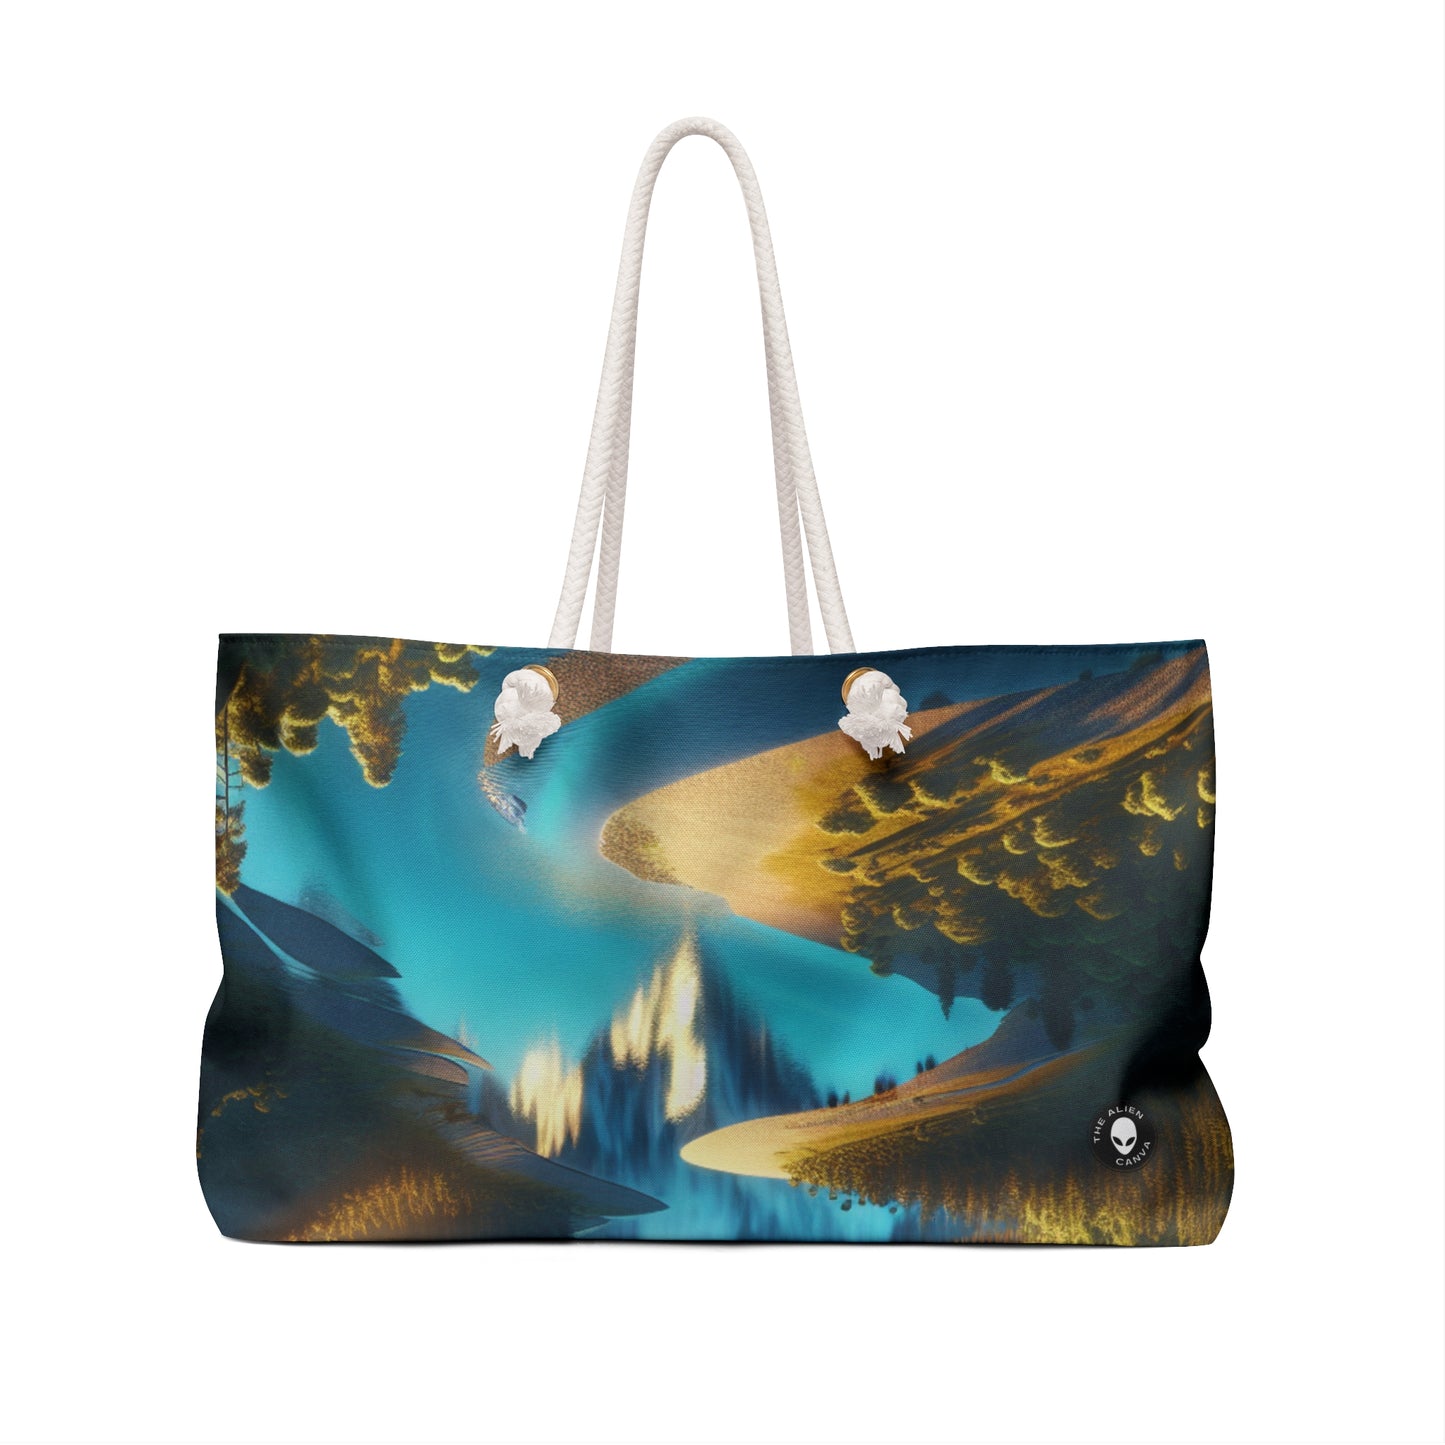 "Serenity's Palette: A Sunset Symphony" - The Alien Weekender Bag Photorealism